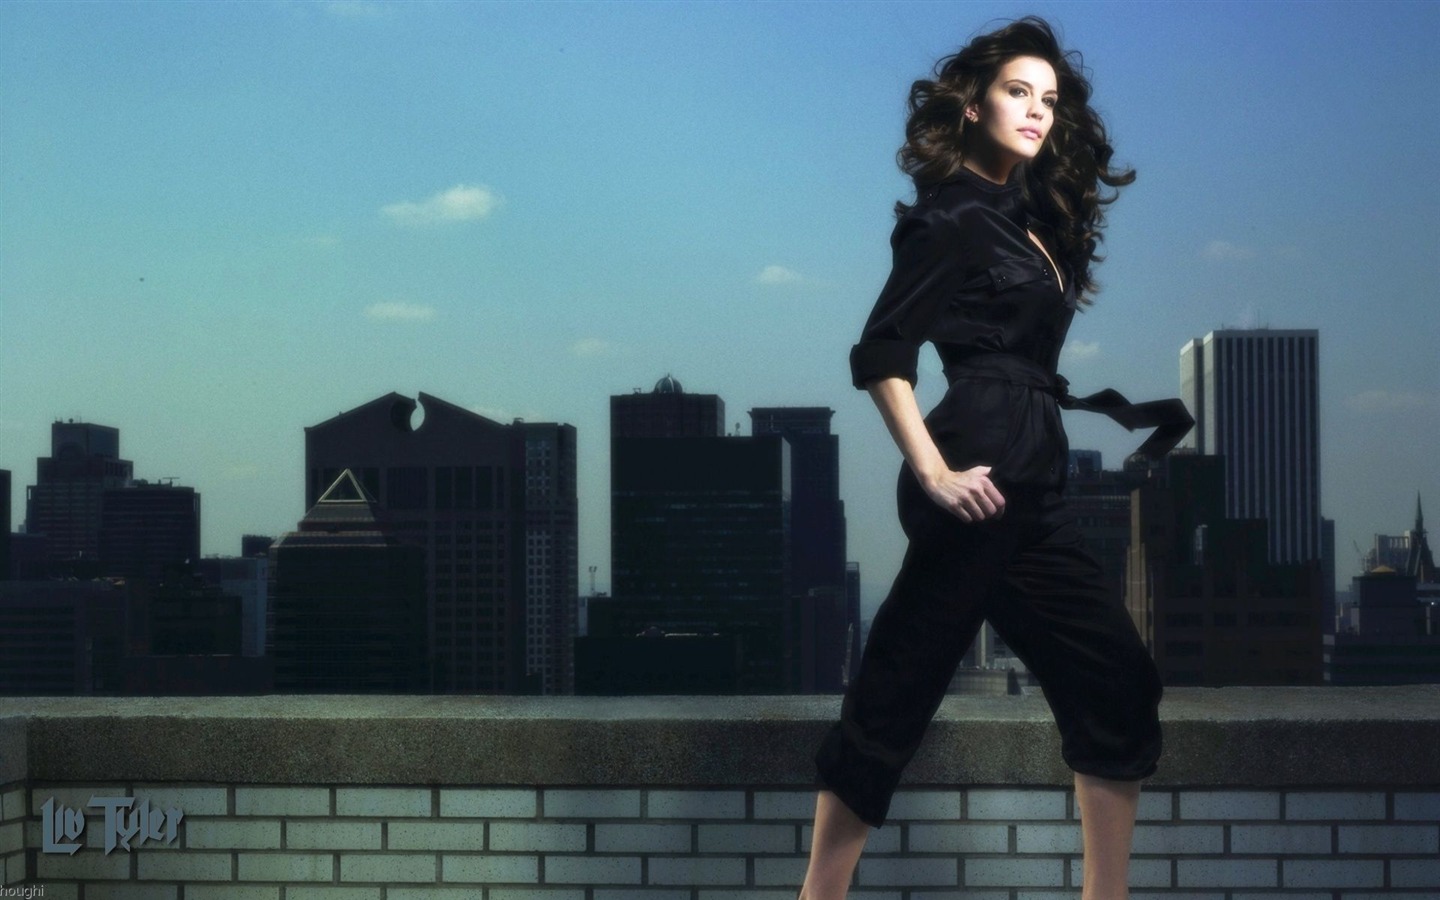 Liv Tyler #008 - 1440x900 Wallpapers Pictures Photos Images